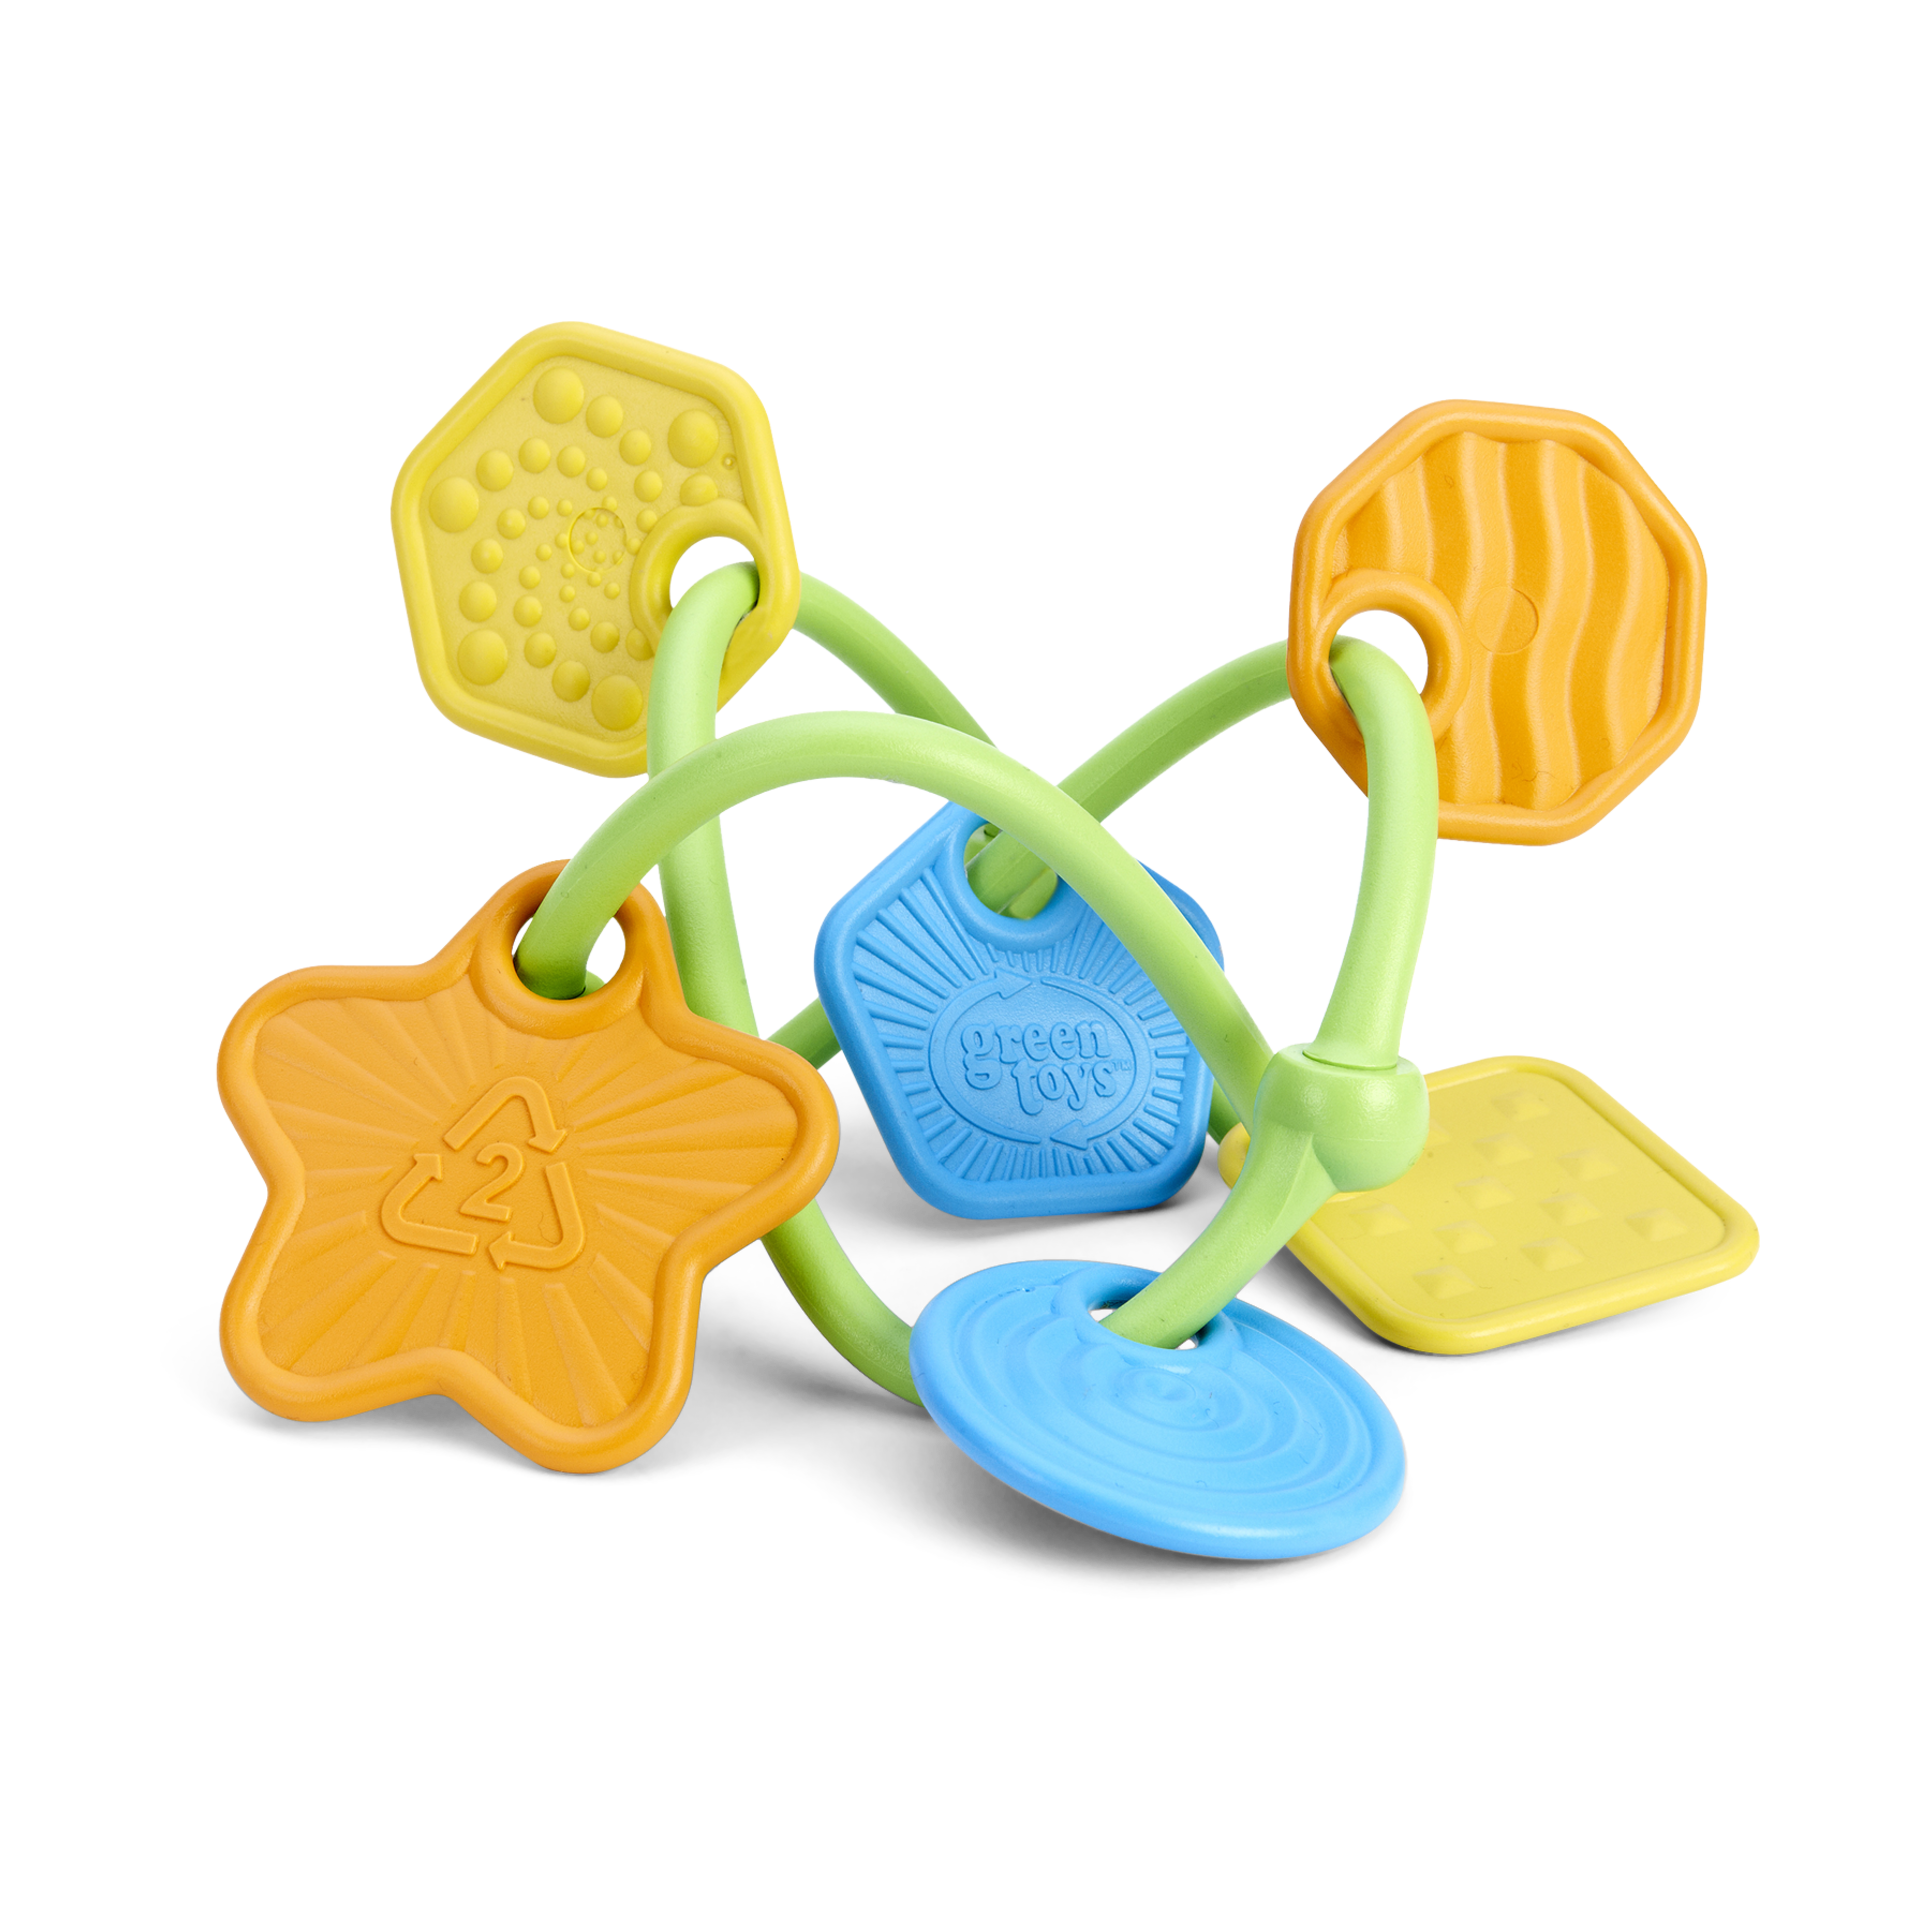 best teething toys for early teethers